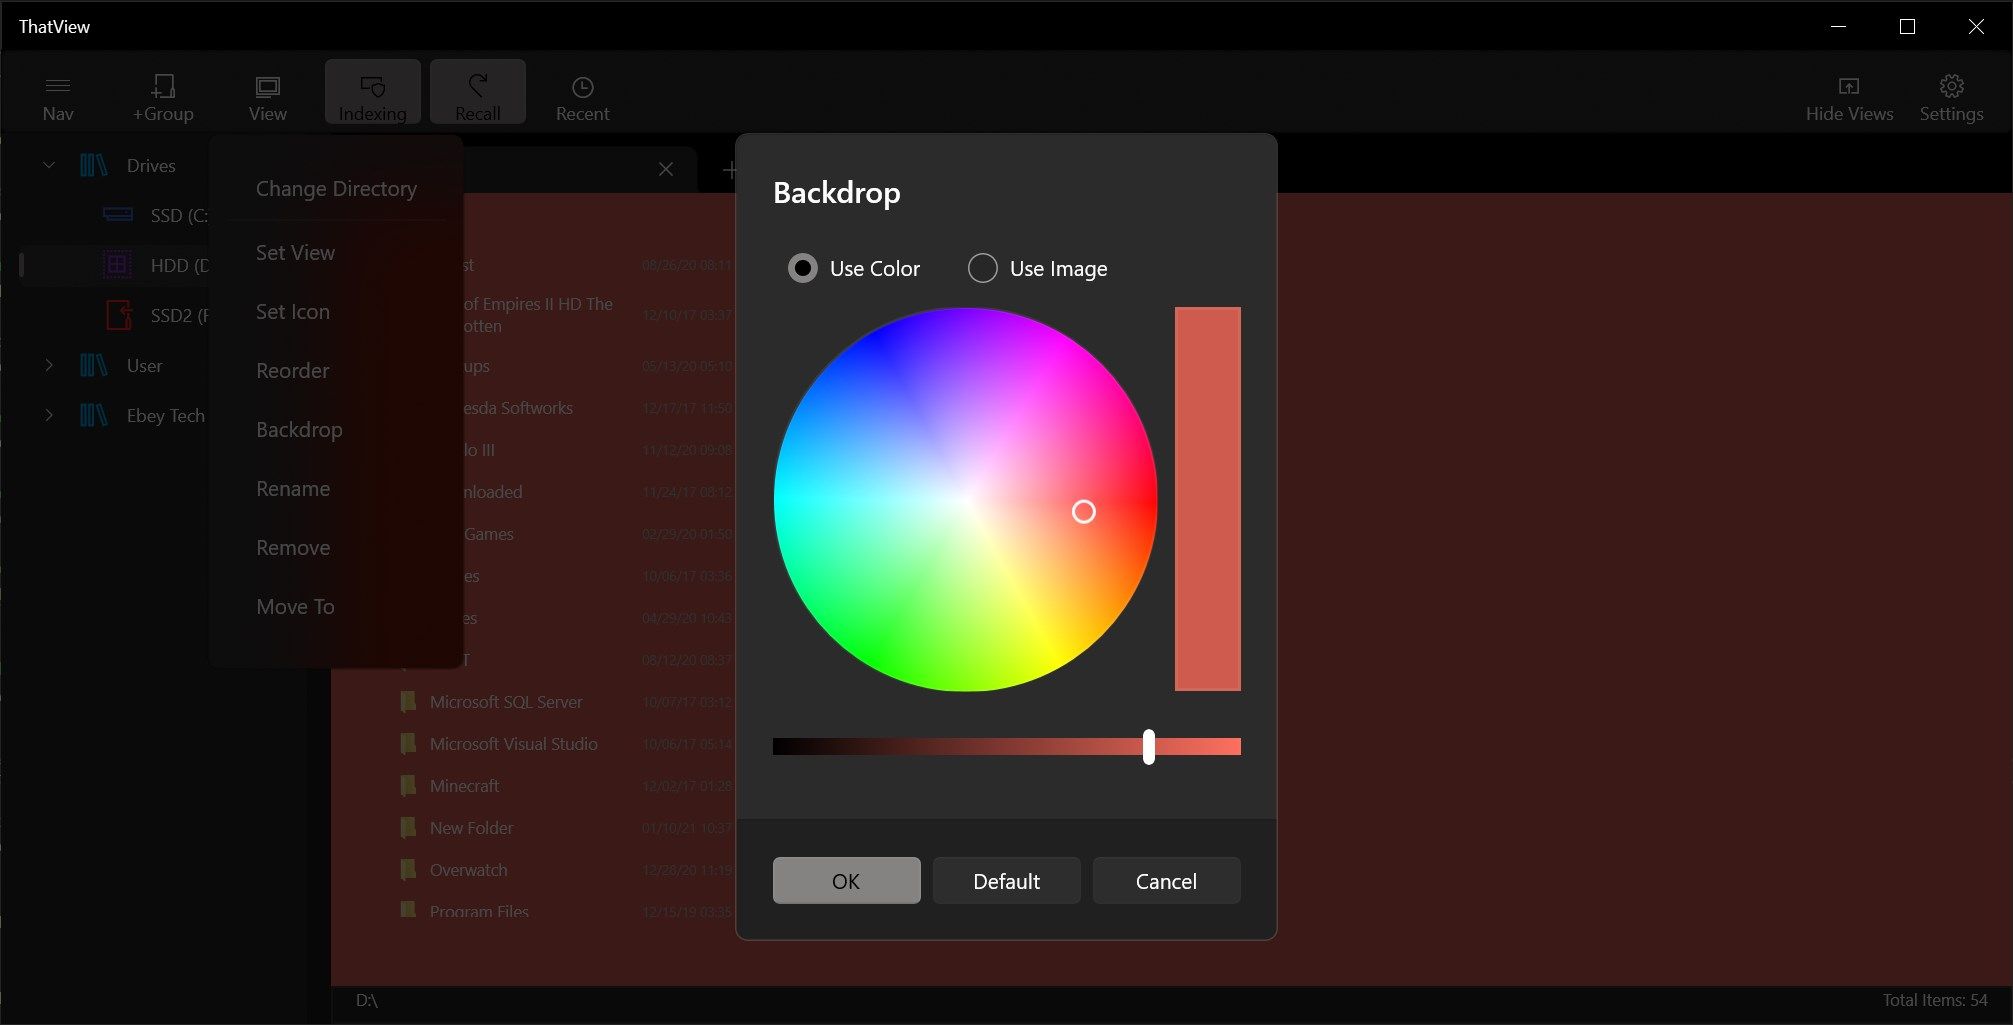 Showing Backdrop color options.